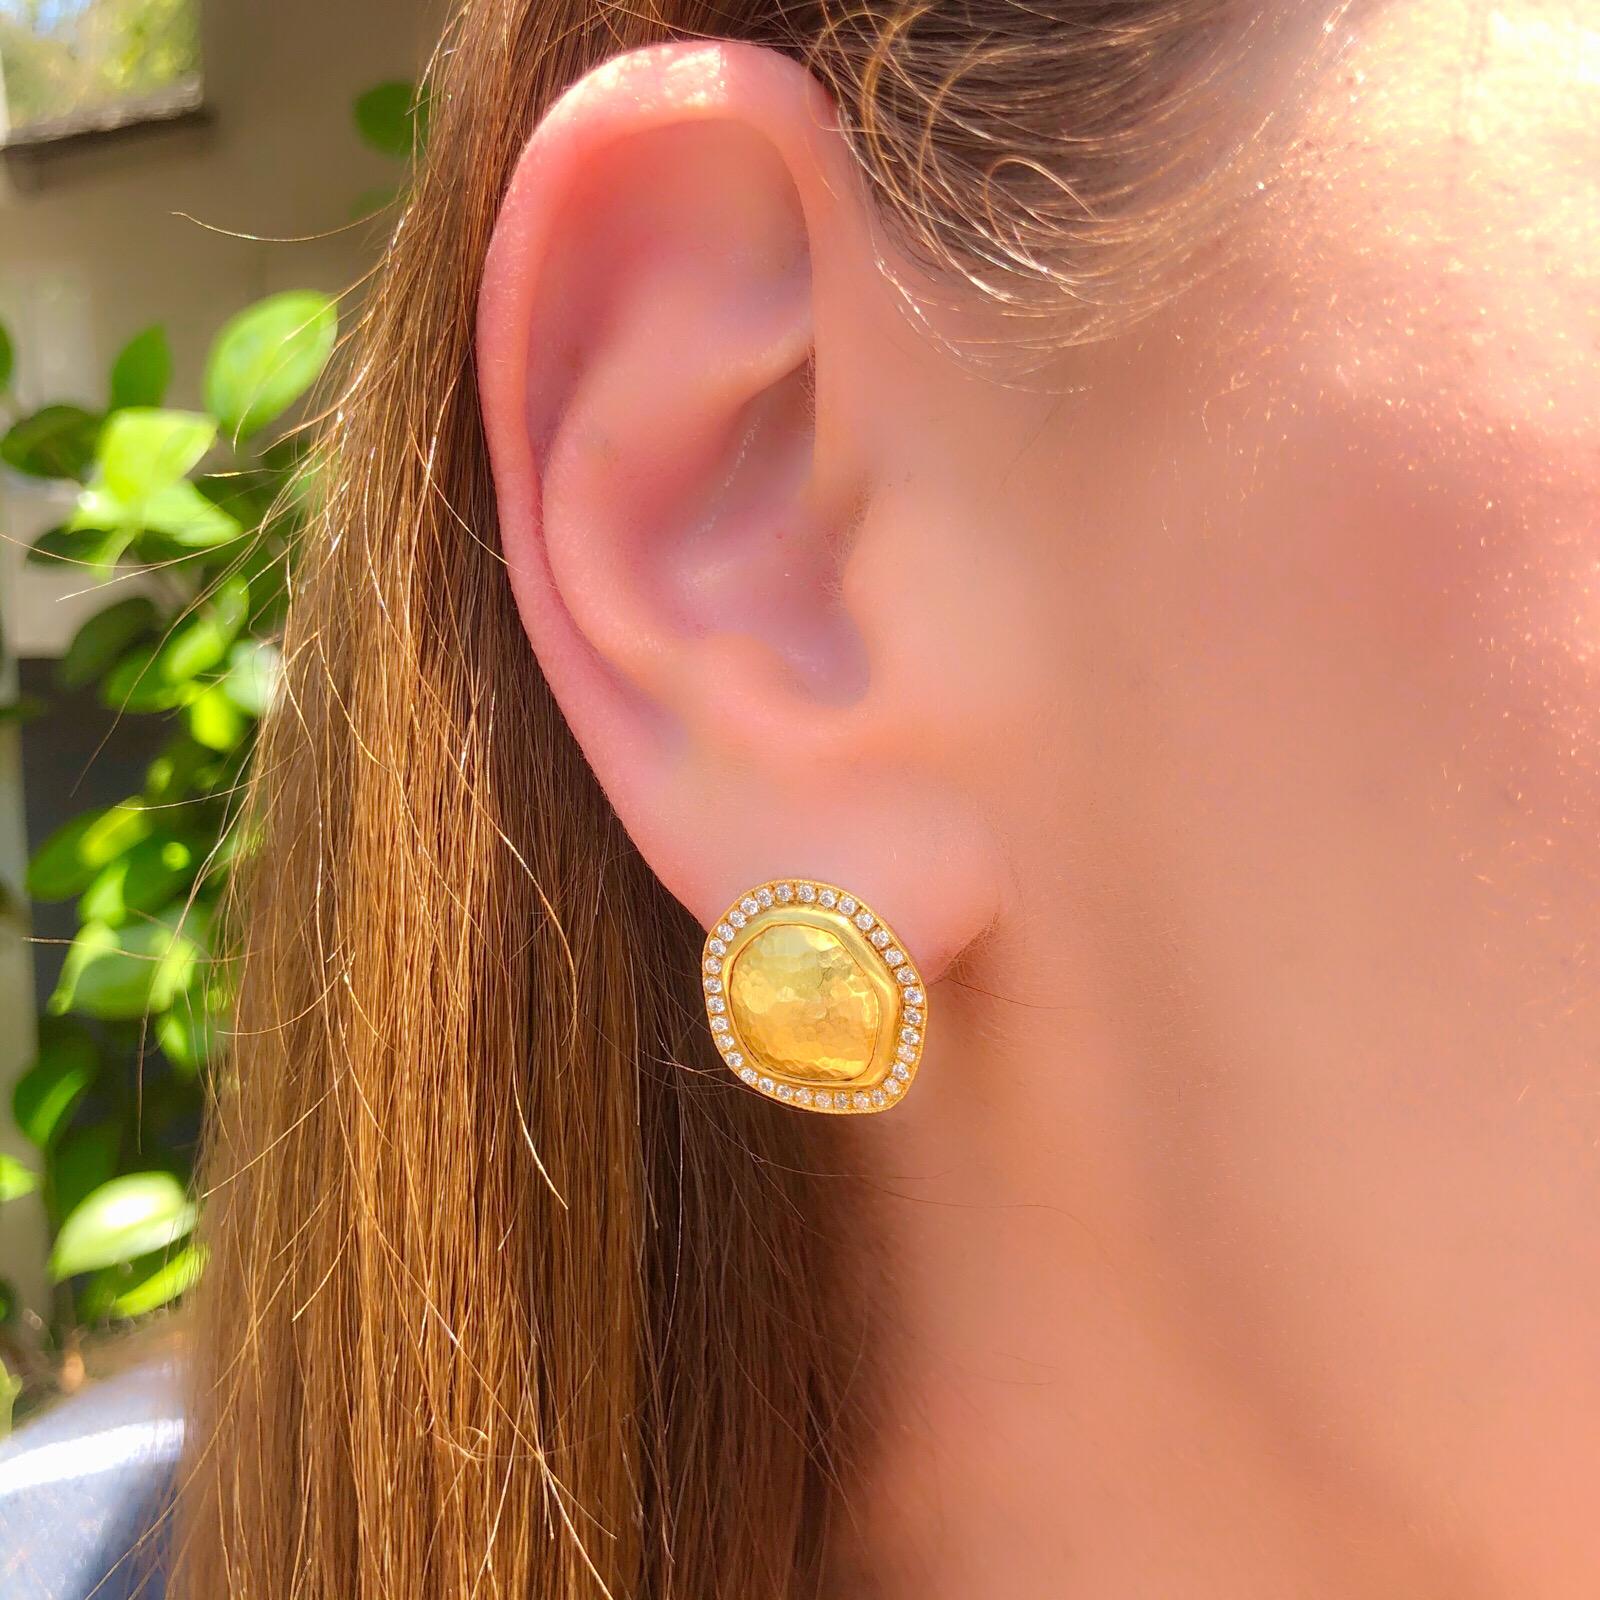 Contemporary and classic, these 22k yellow gold earrings are uniquely designed. Lika Behar brings a modern sensibility to ancient fine jewelry making traditions, creating an East-meets-West beauty to her jewelry. Set with 68 round brilliant-cut